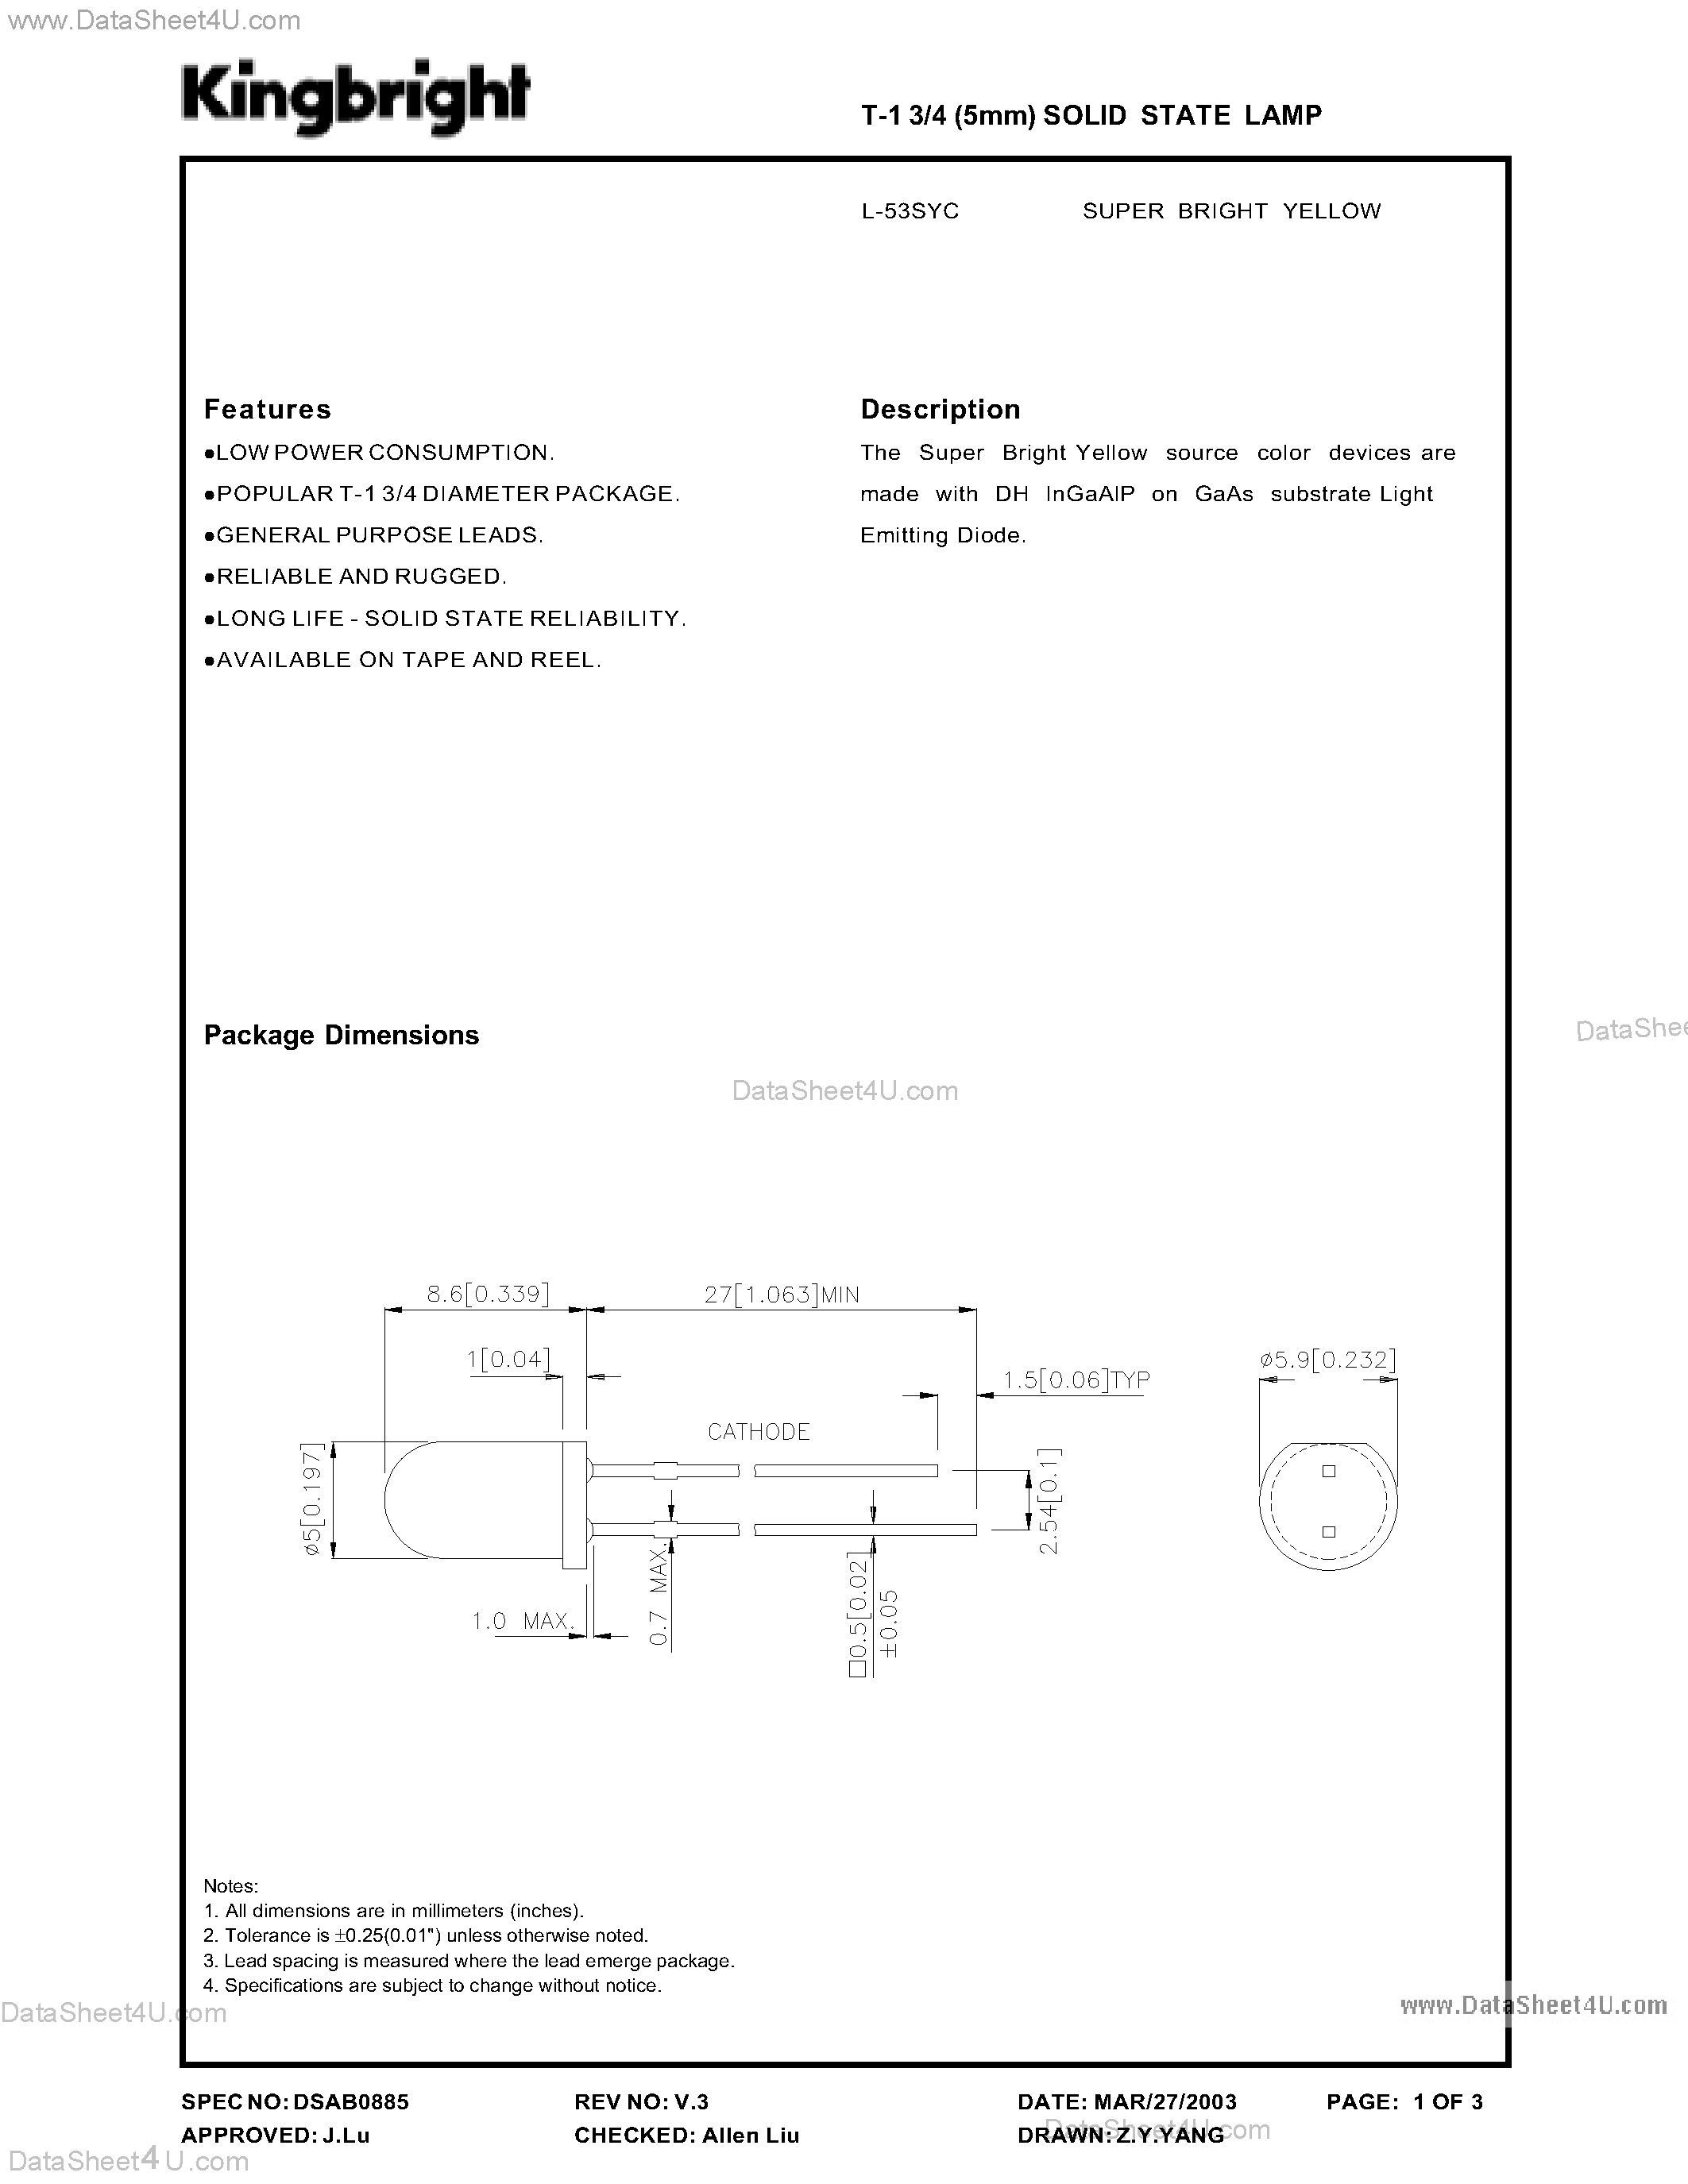 Datasheet L-53SYC - T-1 3/4 (5mm) SOLID STATE LAMP page 1